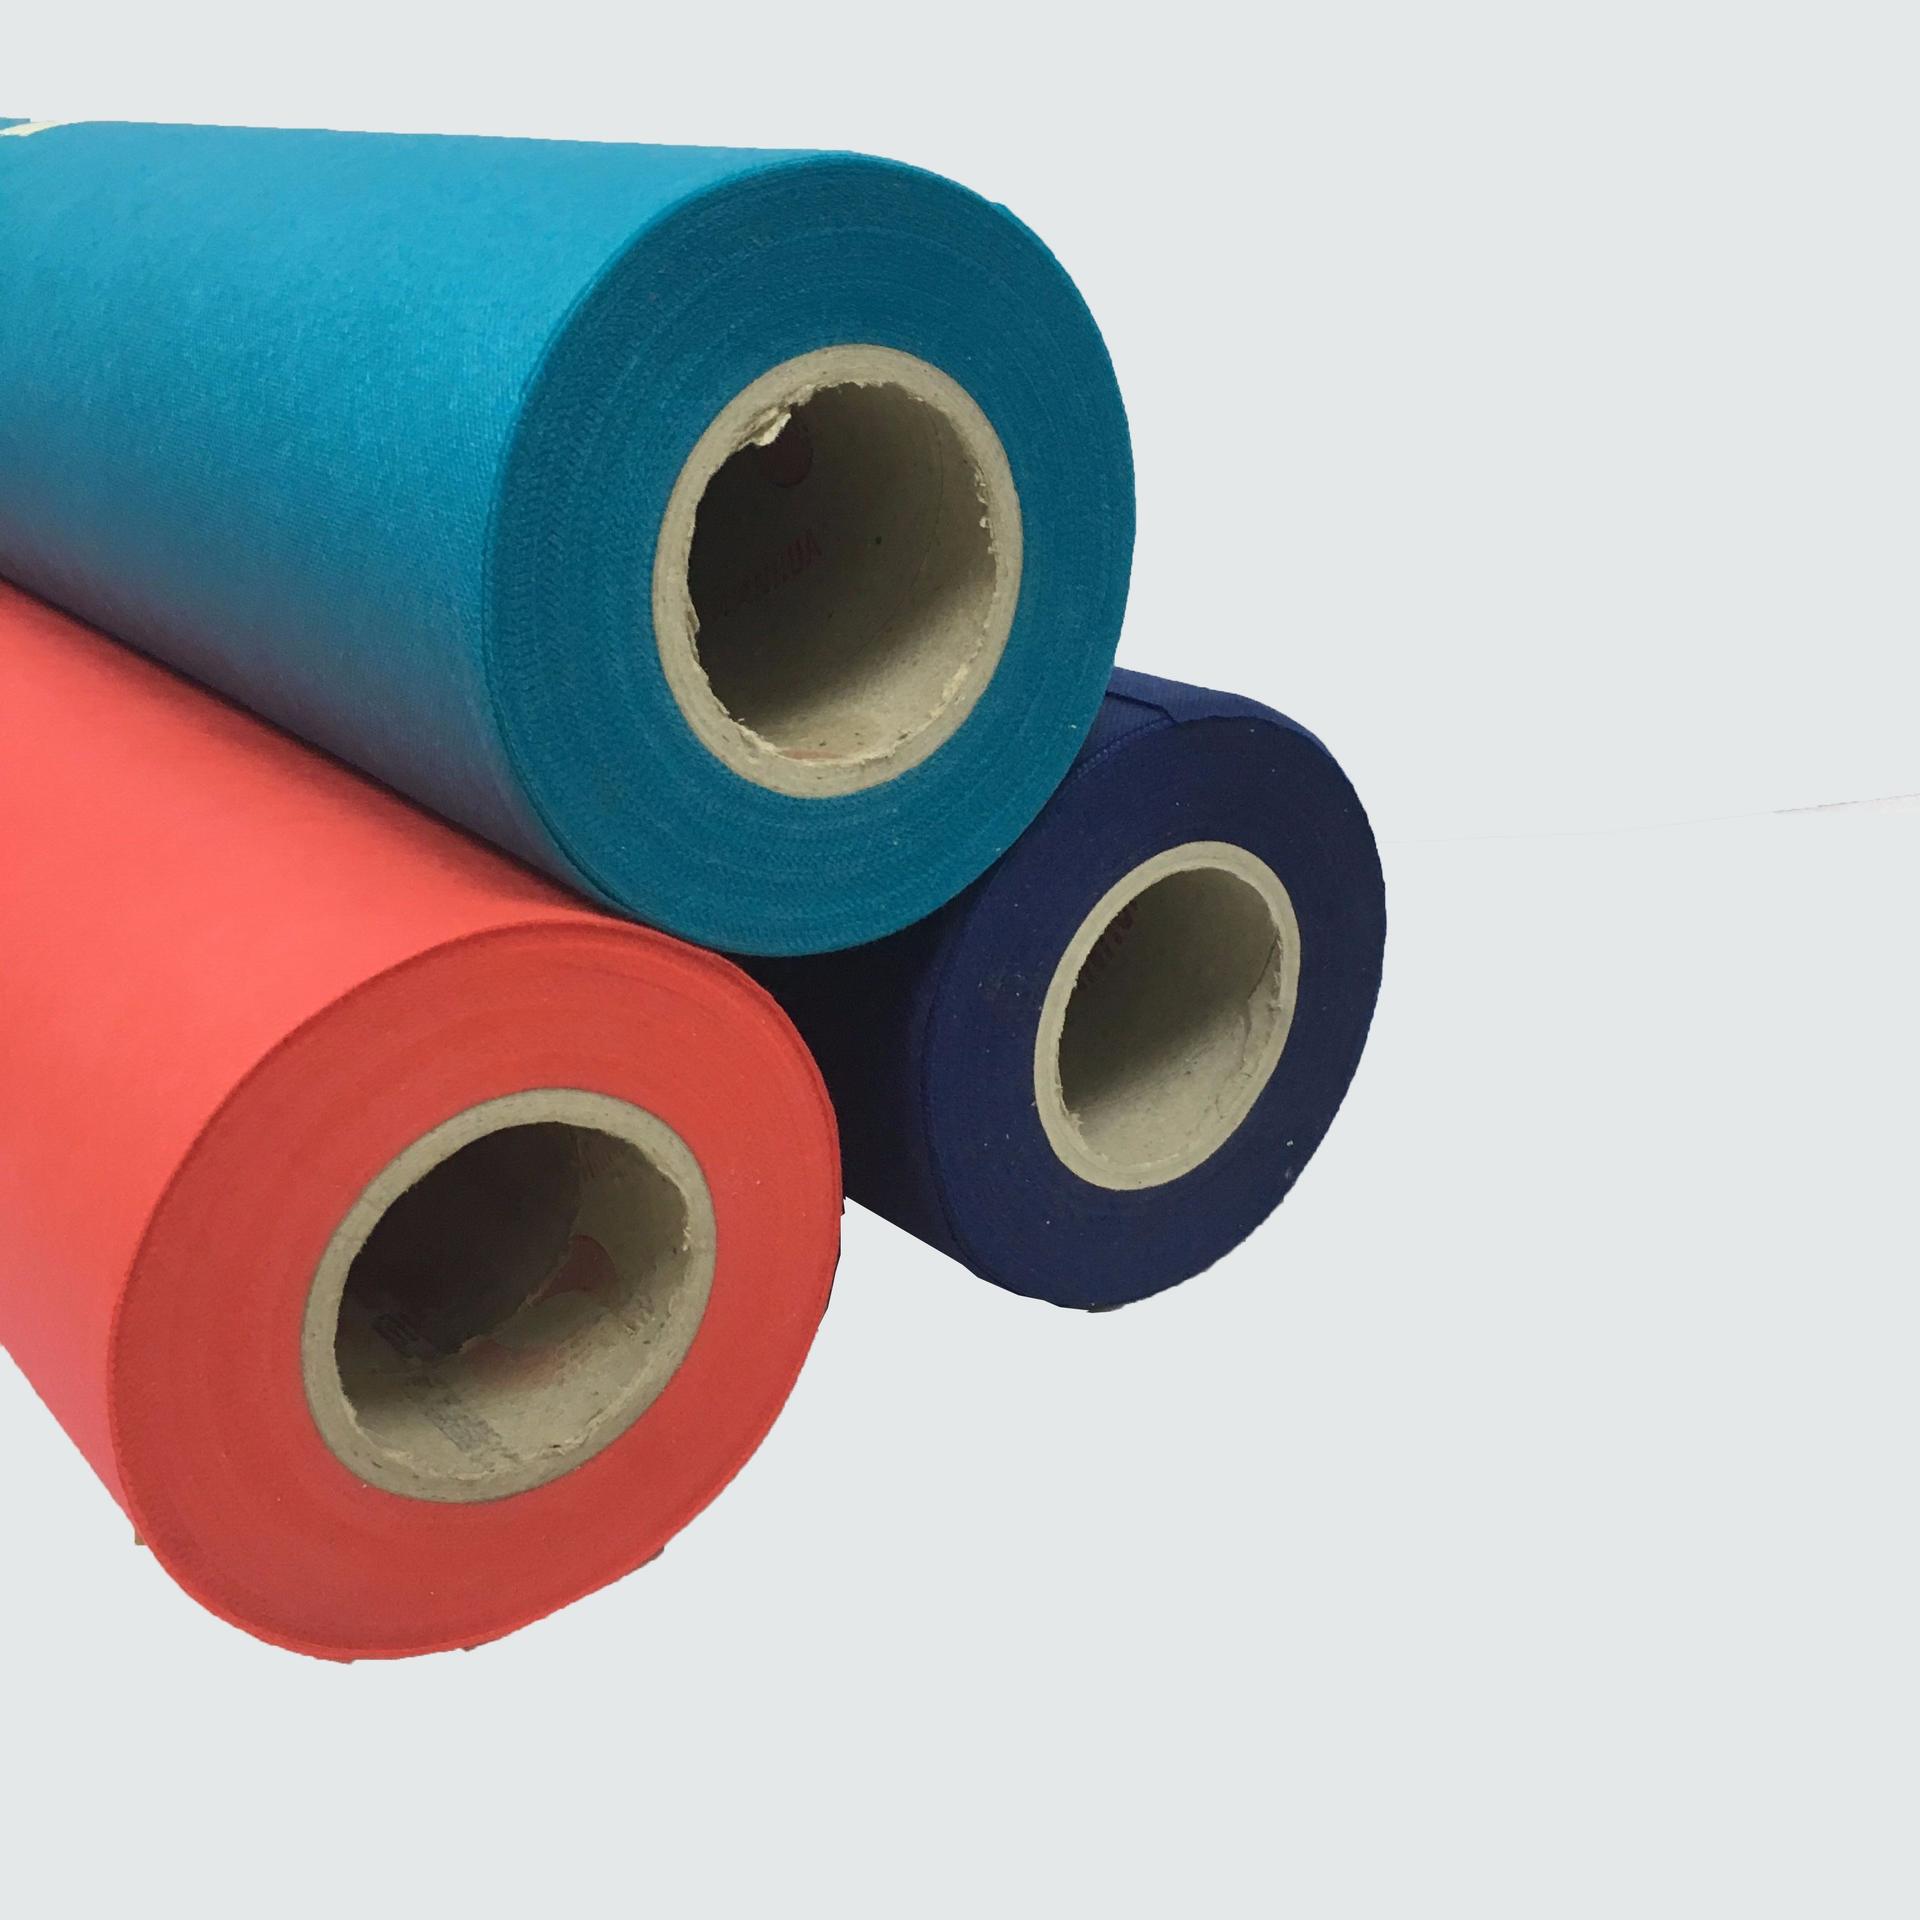 PP Spunbond Nonwoven Fabric From China in Rolls